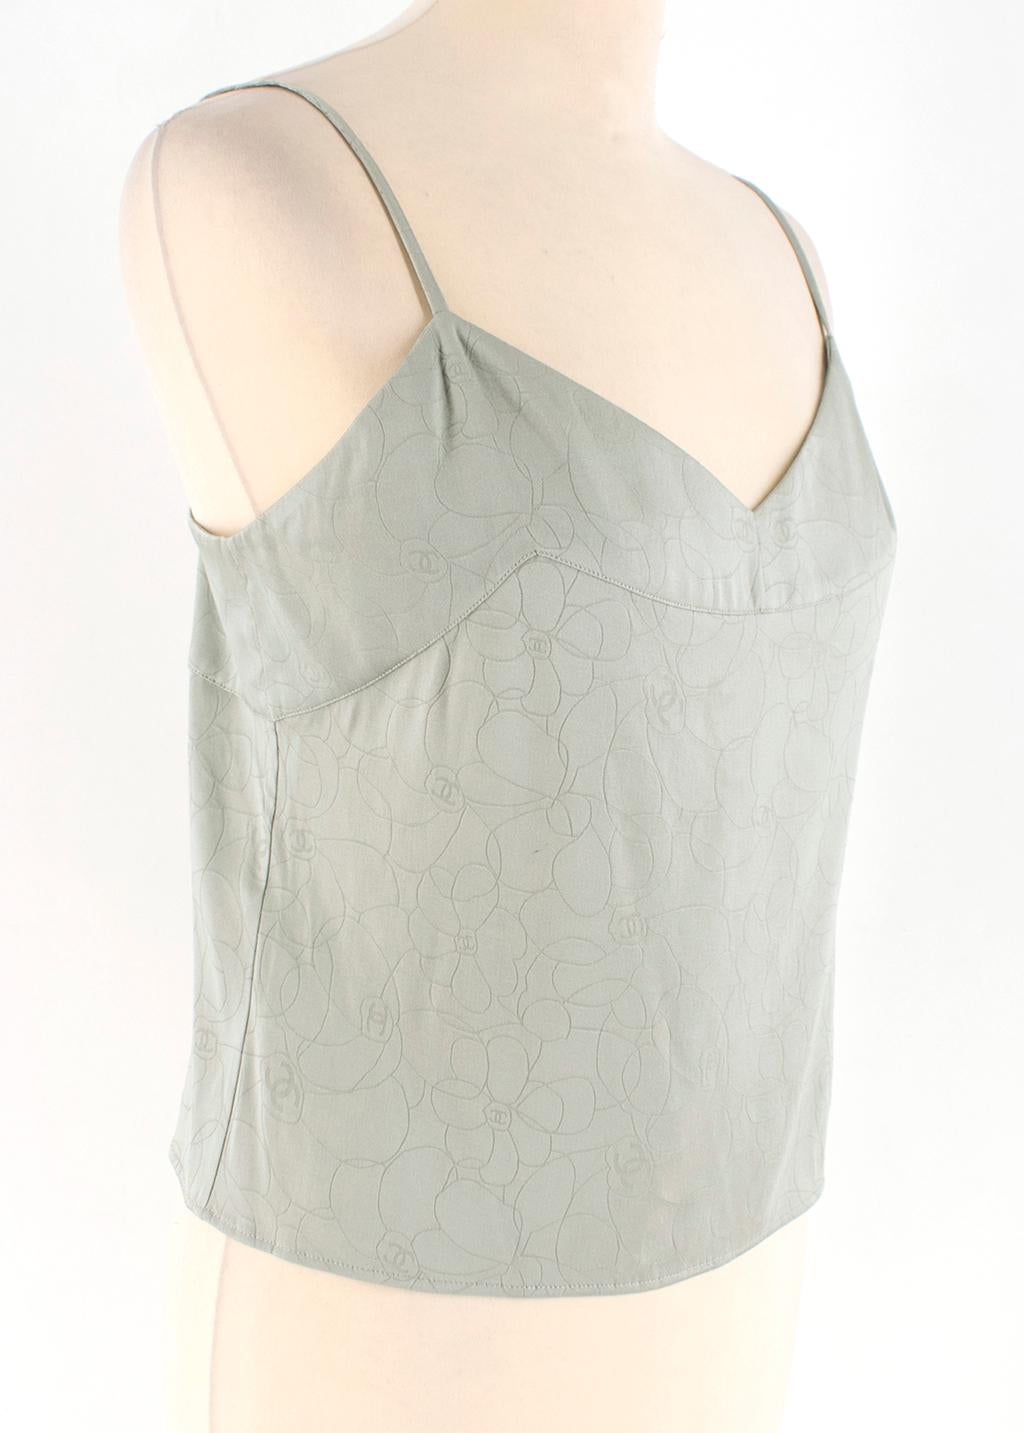 Chanel Mint Green Camellia Embroidered Camisole Top 

Mint green camisole 
Skinny strap
Monogram floral print 
Light weight 
Loose fit 
Single back button closure 
Black mother of pearl button 

All measurements are taken seam to